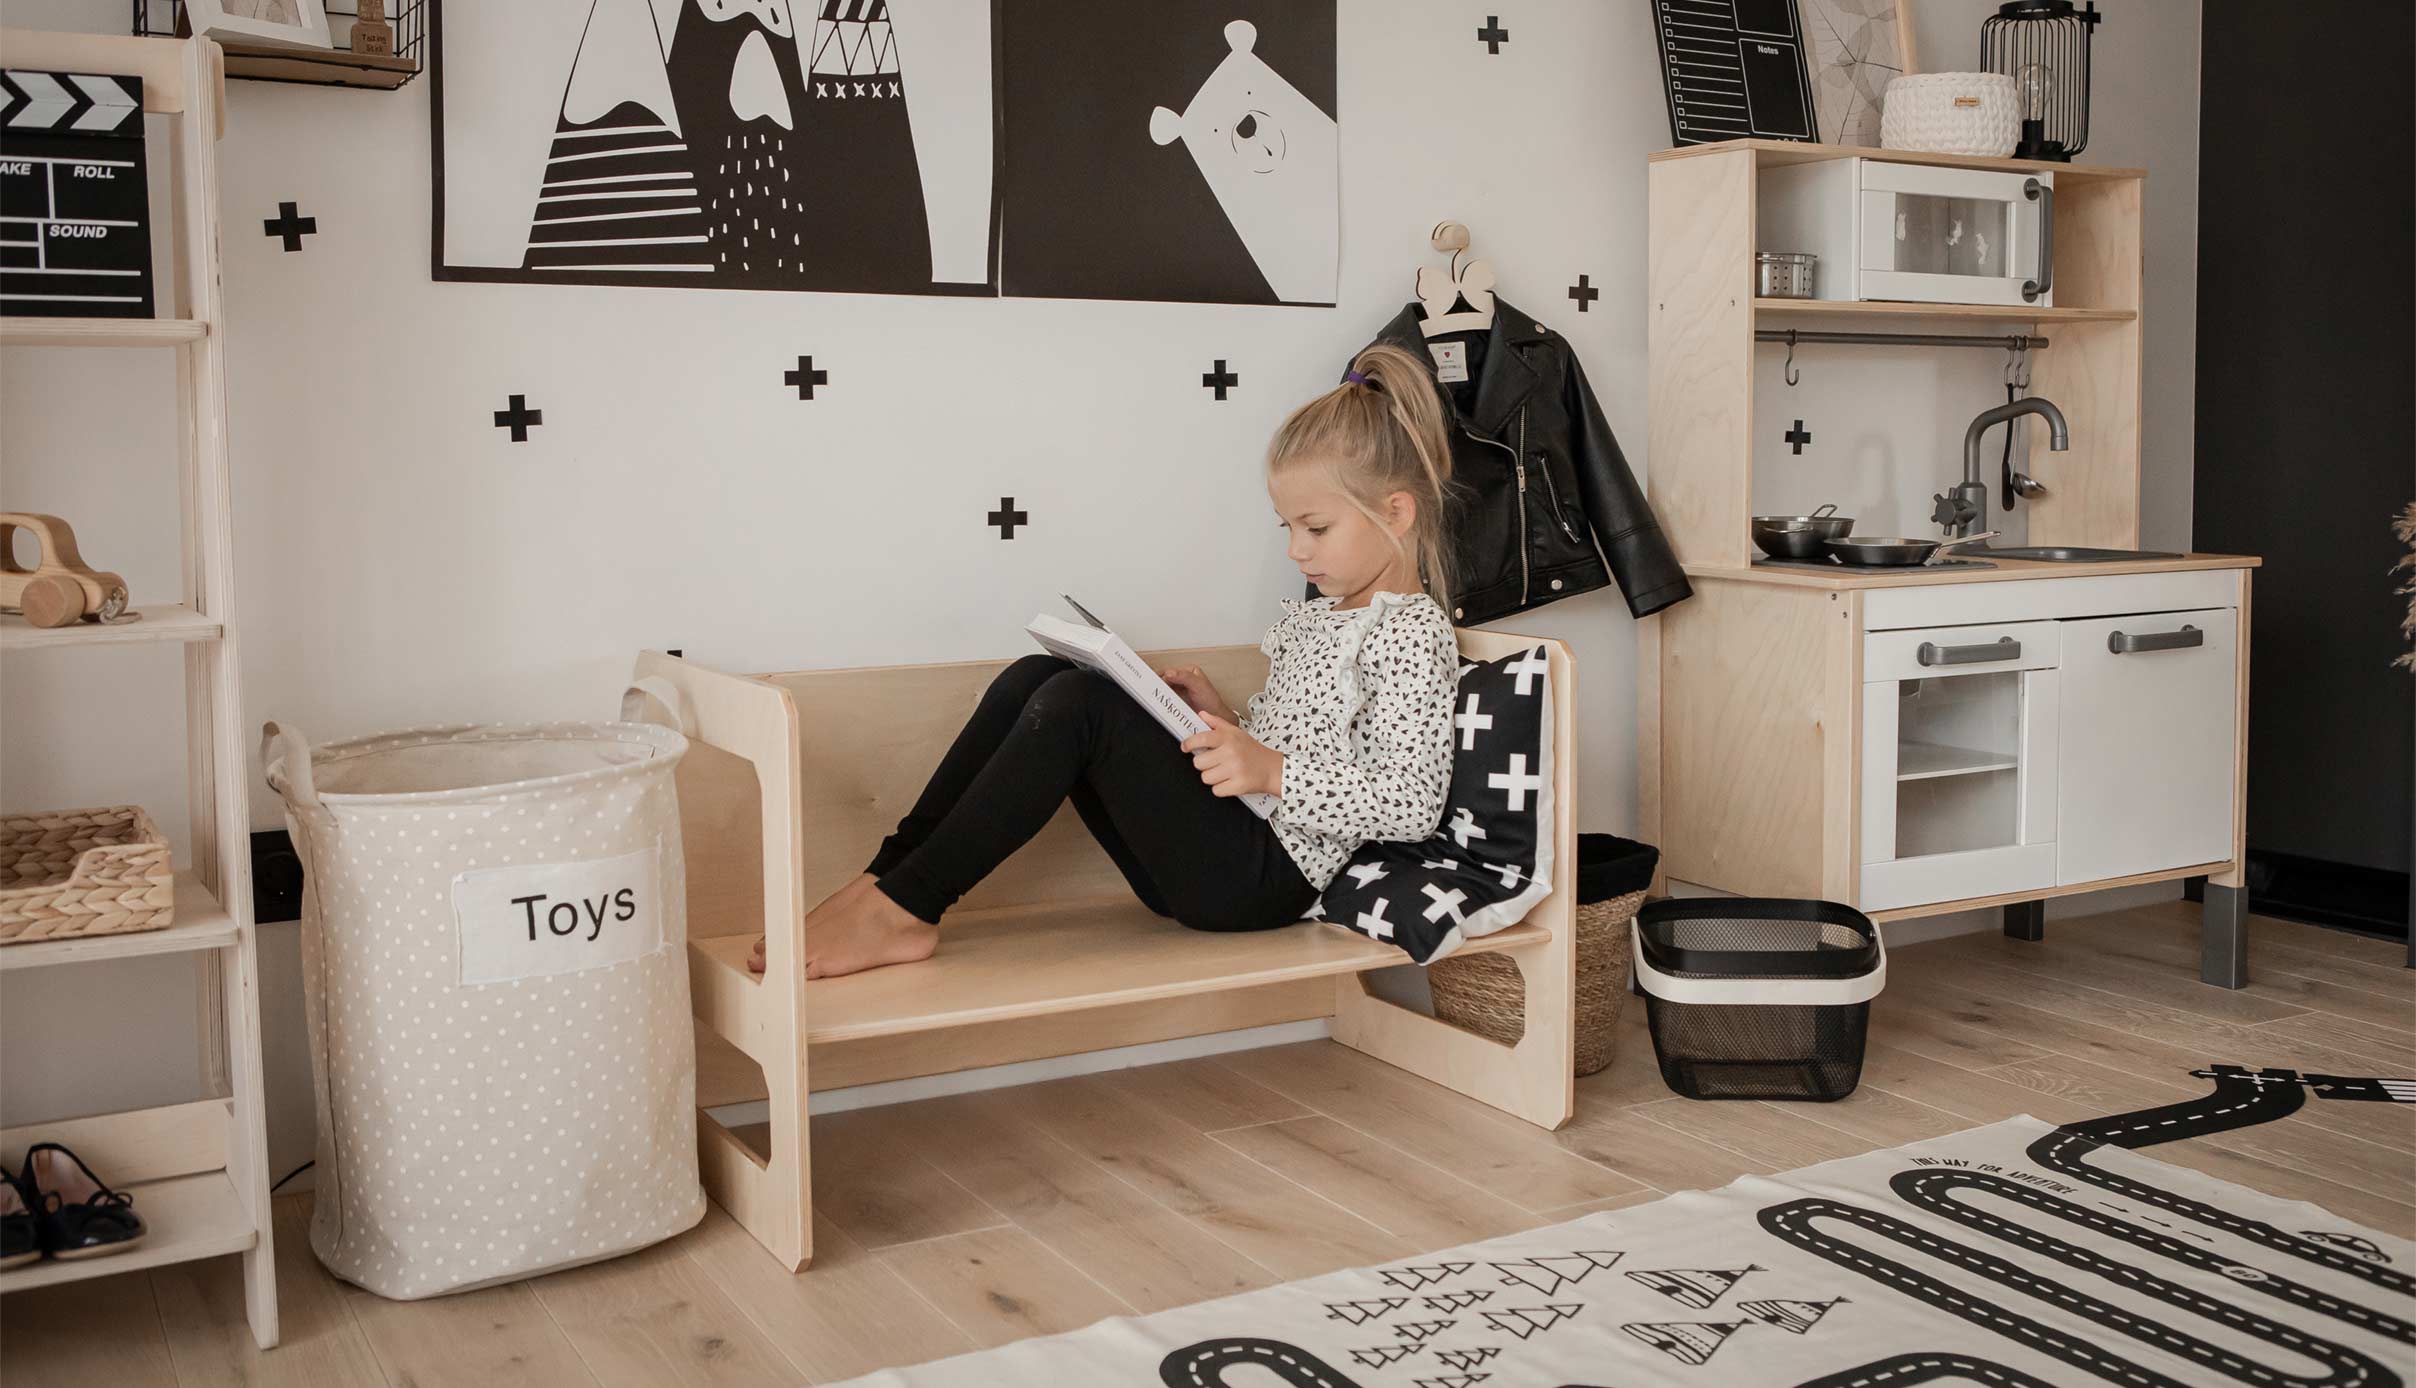 A black and white playroom with a little girl reading on a bench.